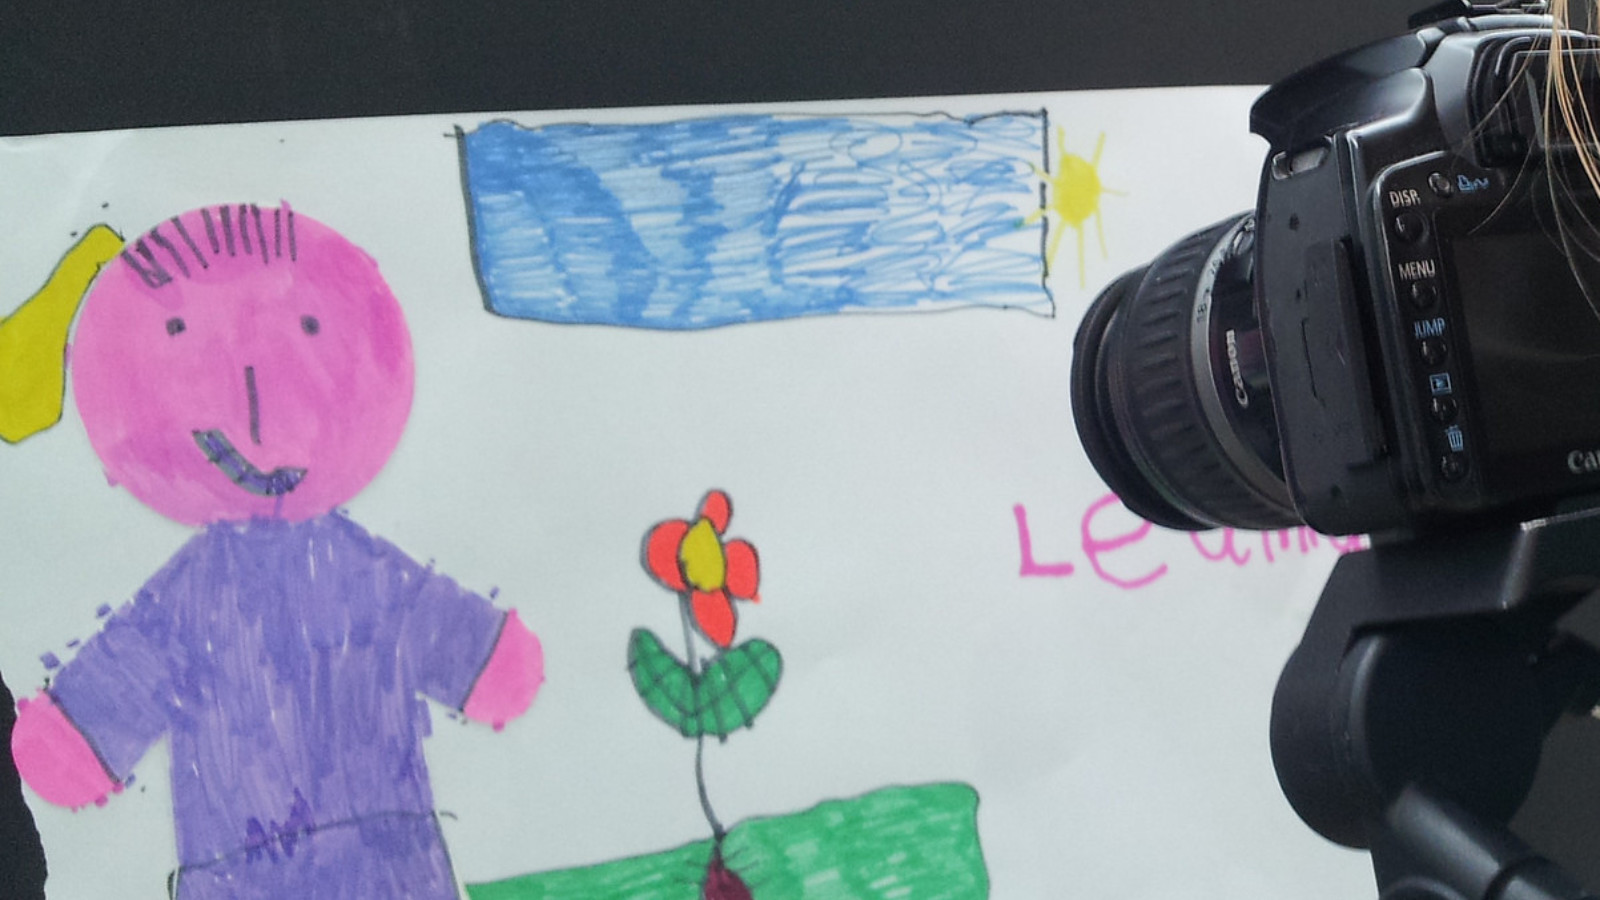 A digital camera is pointed towards a felt tip drawing of a person standing on a patch of grass next to a flower.